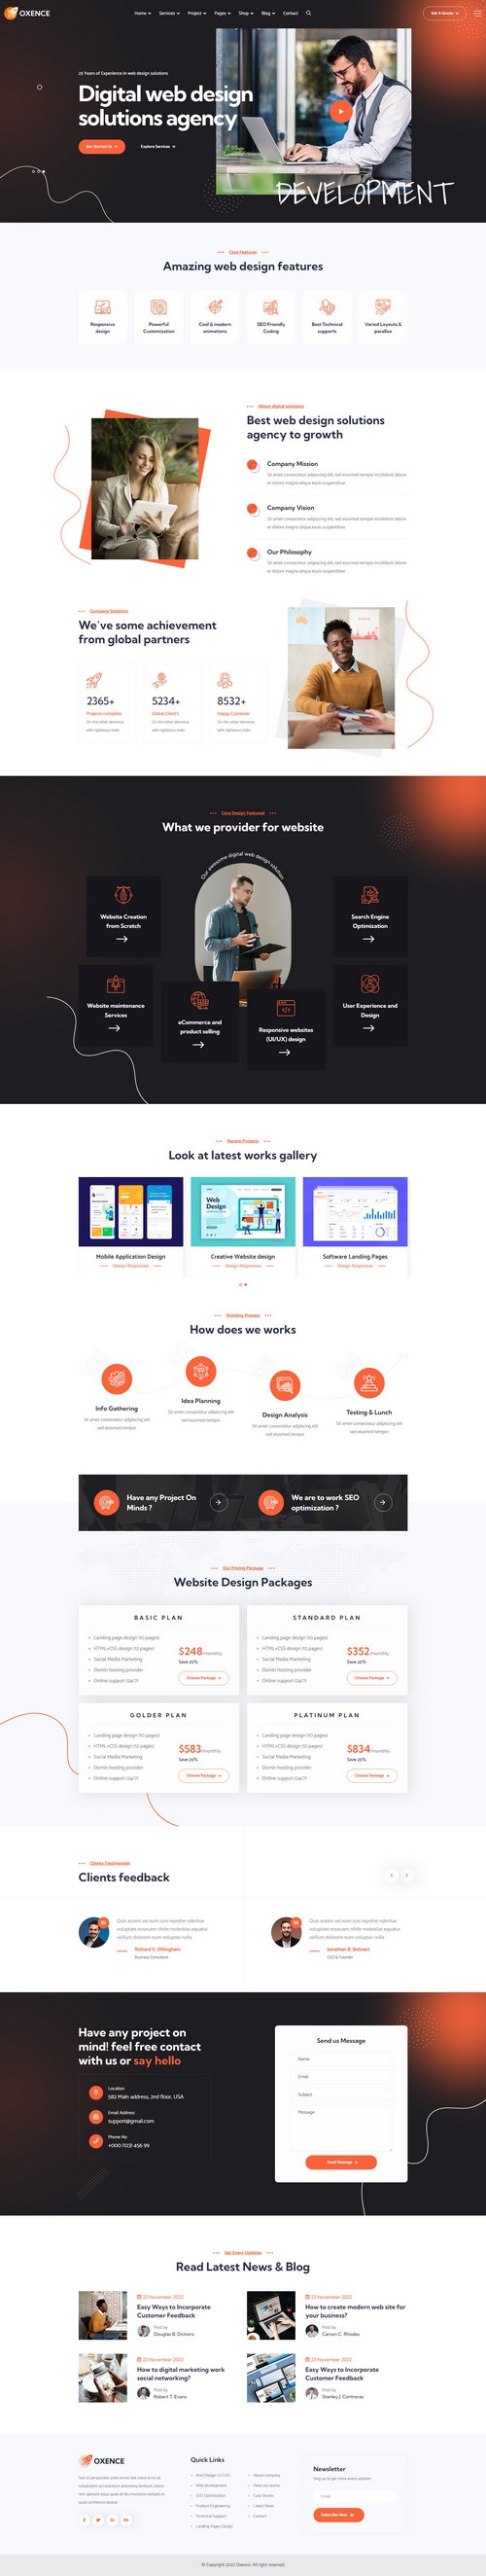 Oxence - Web Design Agency Joomla Template